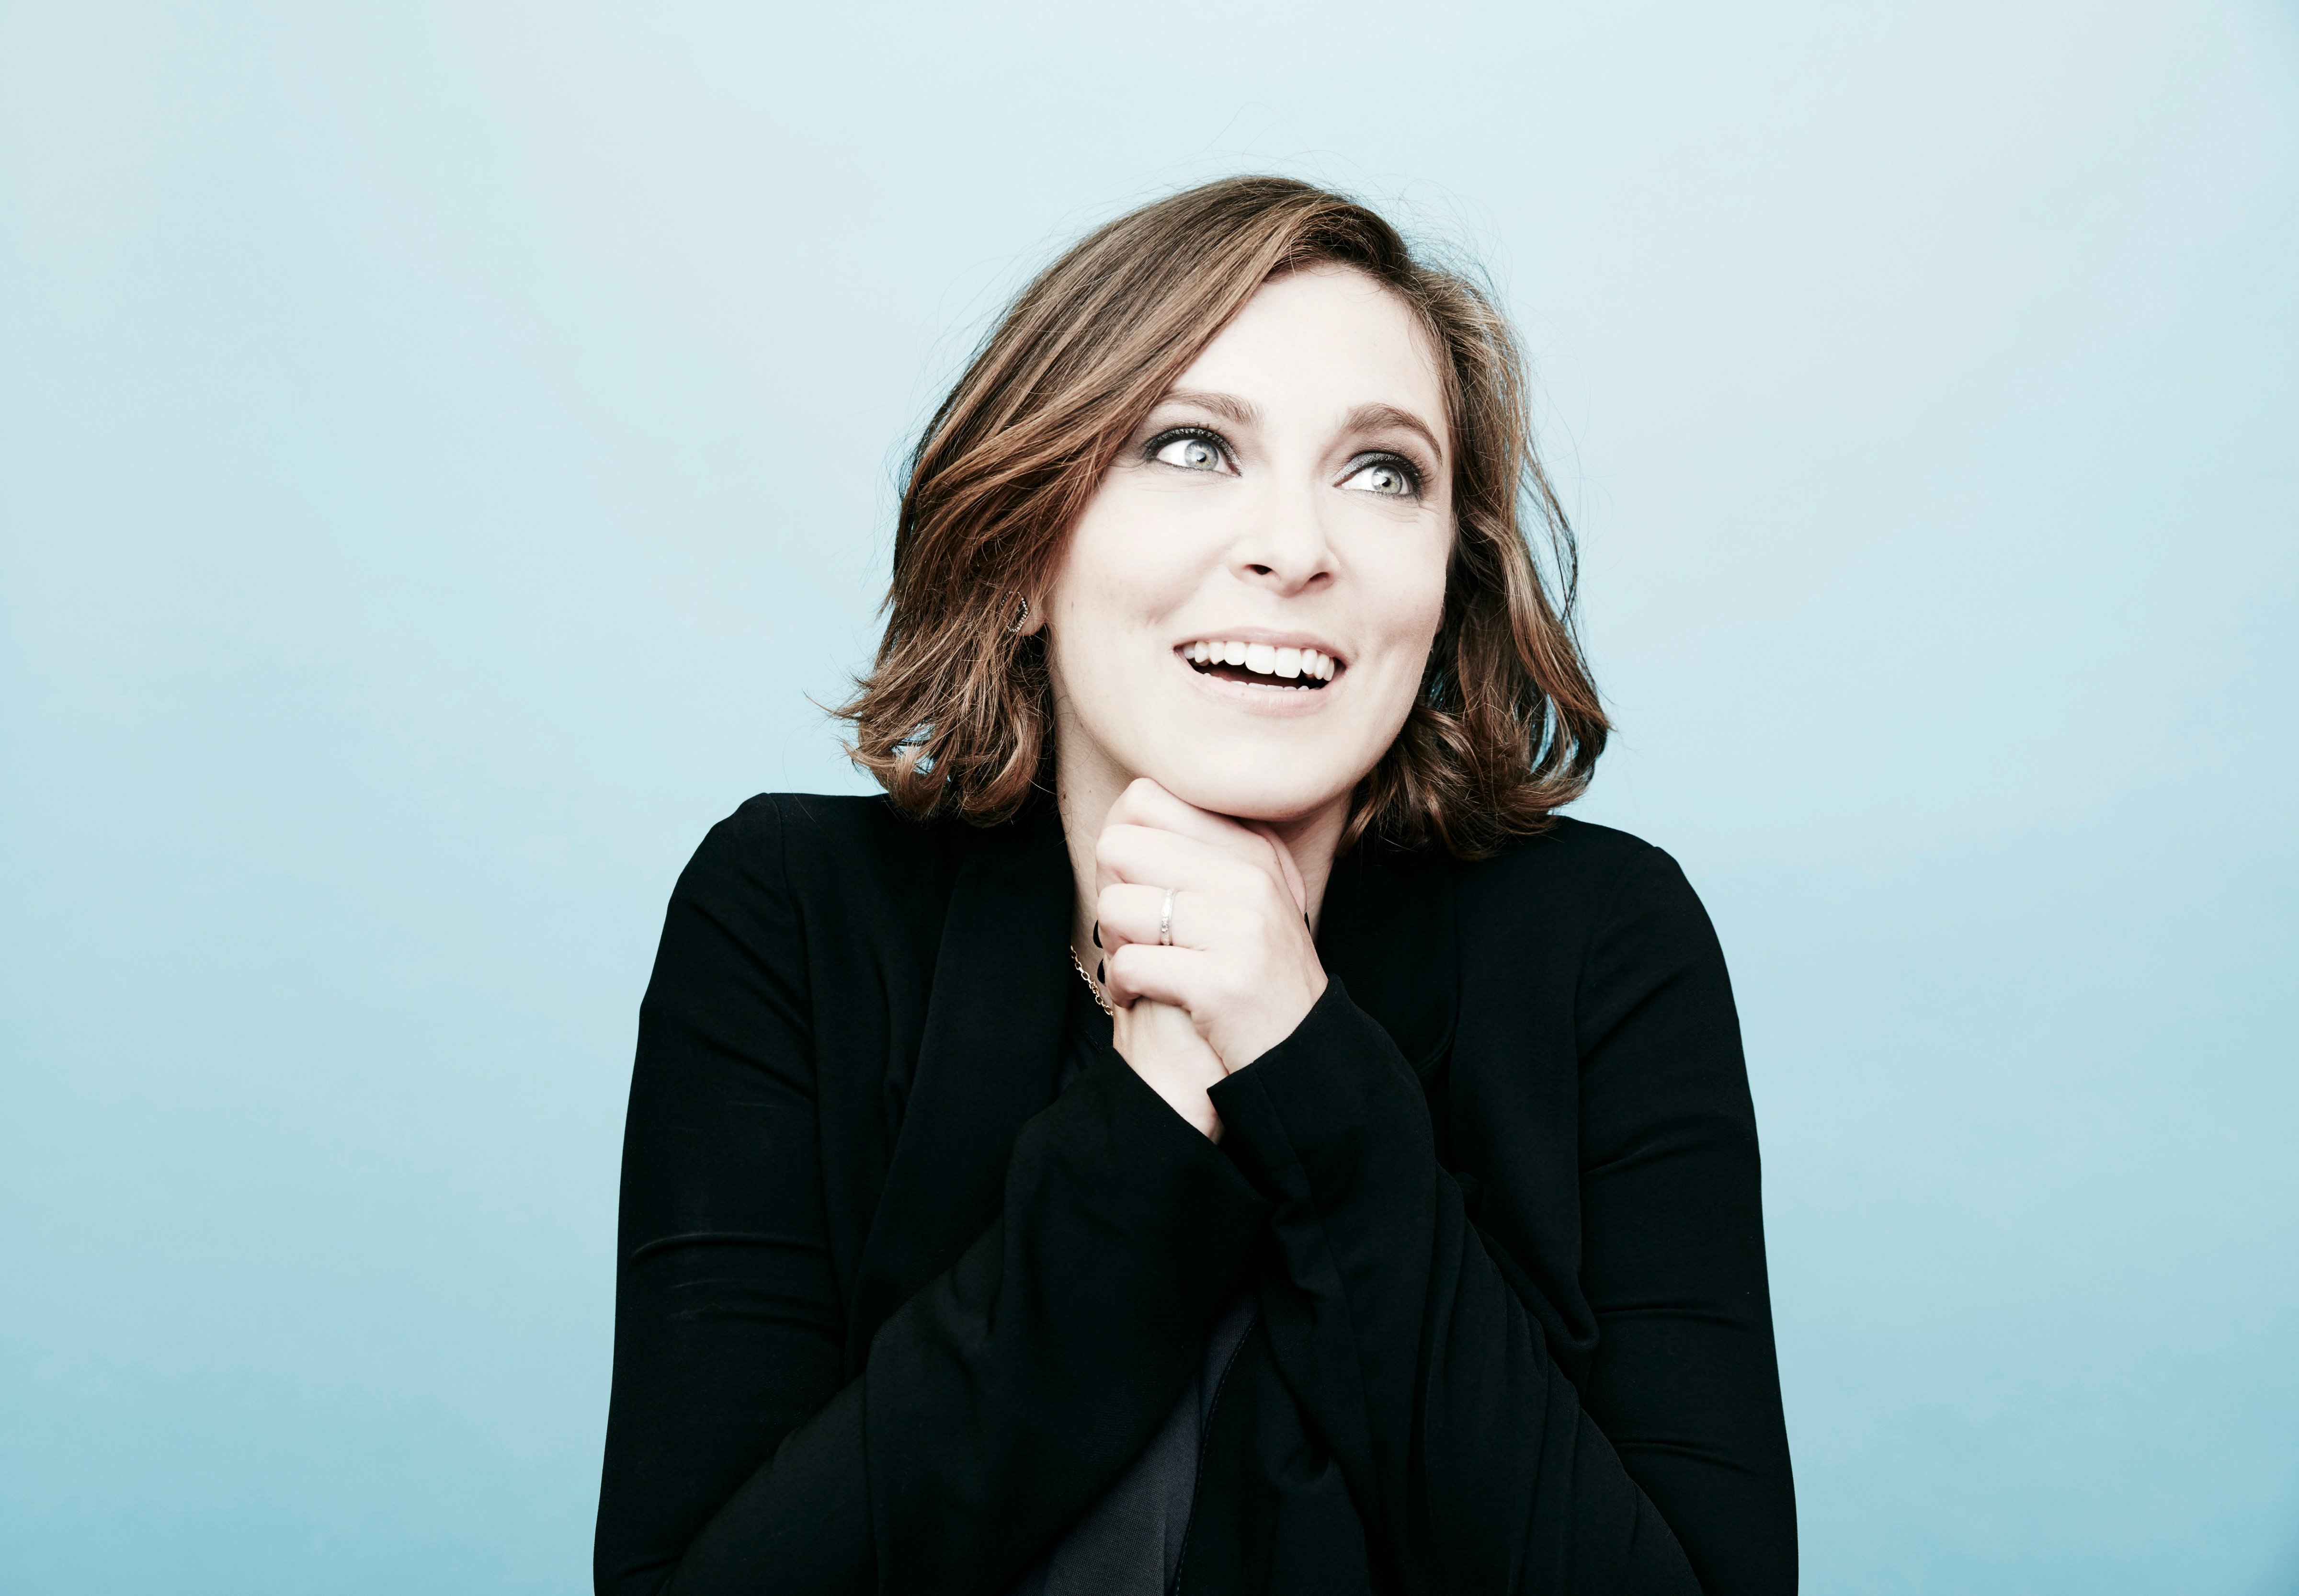 Rachel Bloom poses in the Getty Images Portrait Studio on August 11, 2015 in Beverly Hills, California. (Maarten de Boer--2015 Maarten de Boer/Getty Images)